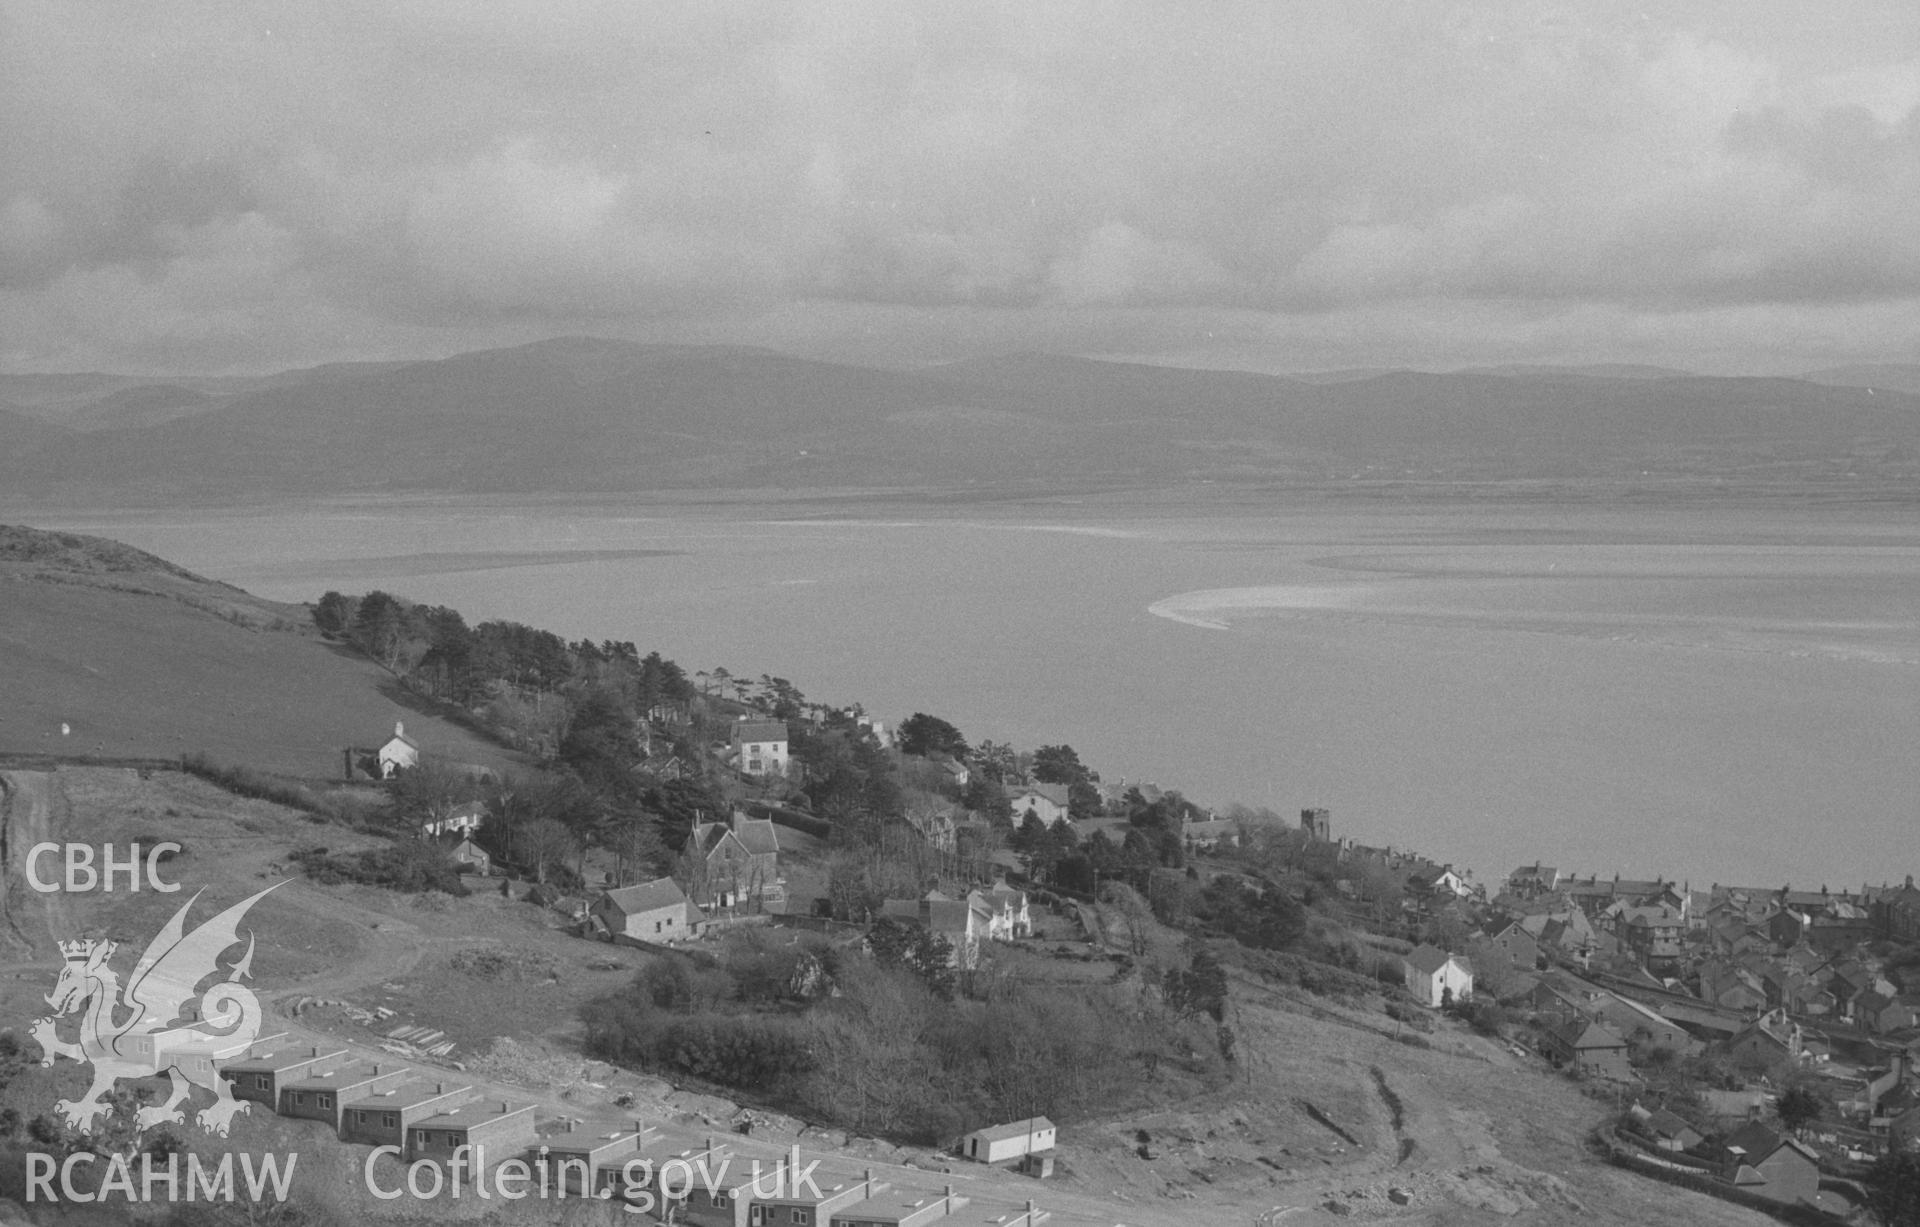 Digital copy of a black and white negative showing view across Dyfi estuary from above Aberdovey. Photographed in April 1964 by Arthur O. Chater from Grid Reference SN 611 964, looking east - south south west.